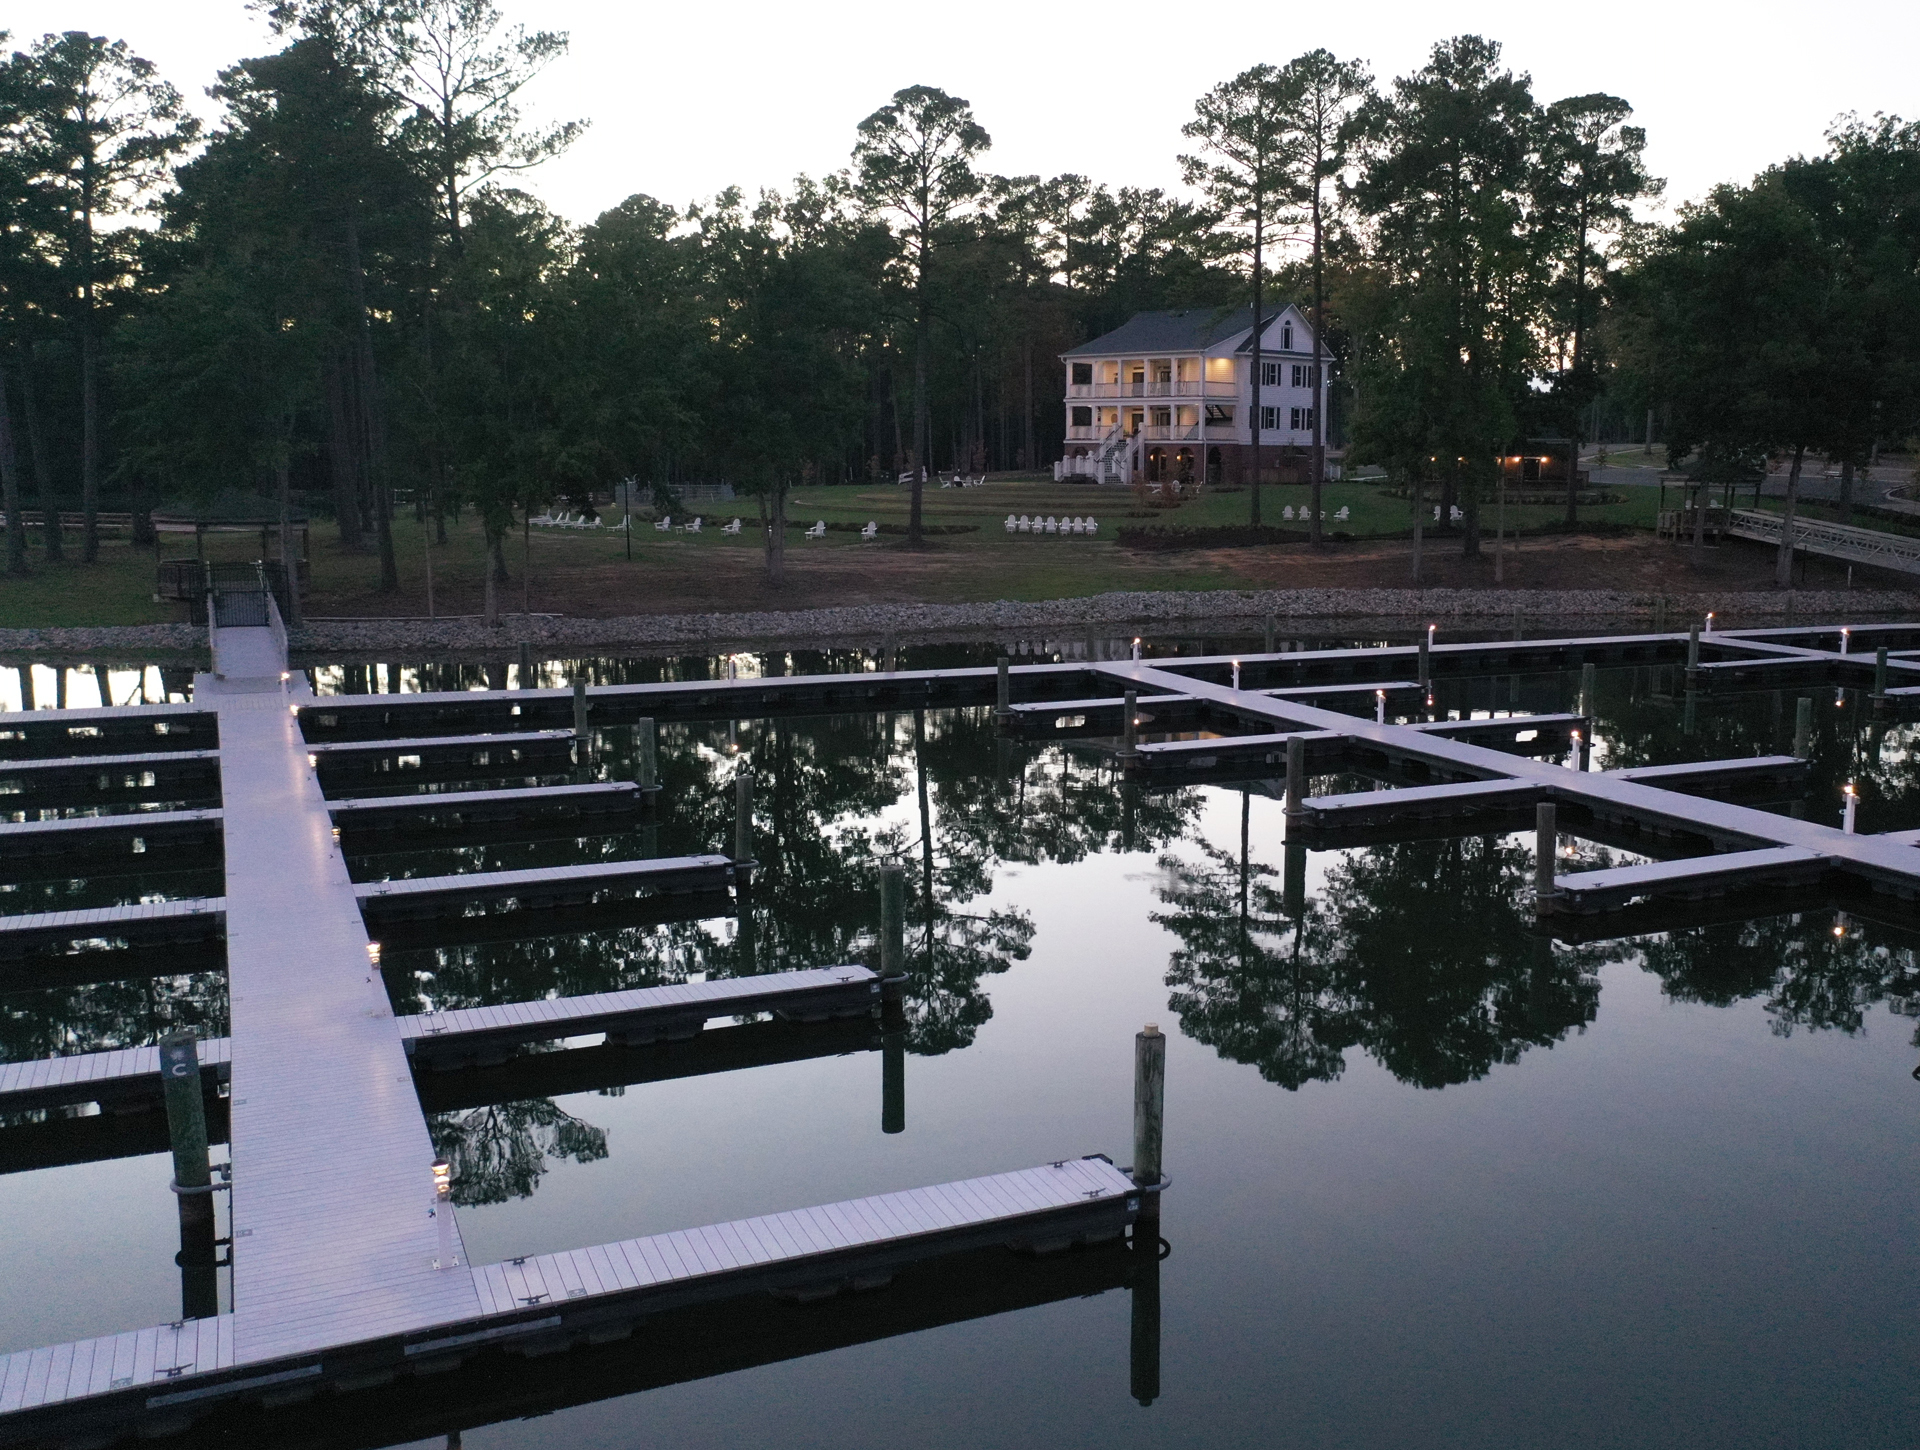 Views of the Private Marina with Lights from the Water at Dusk